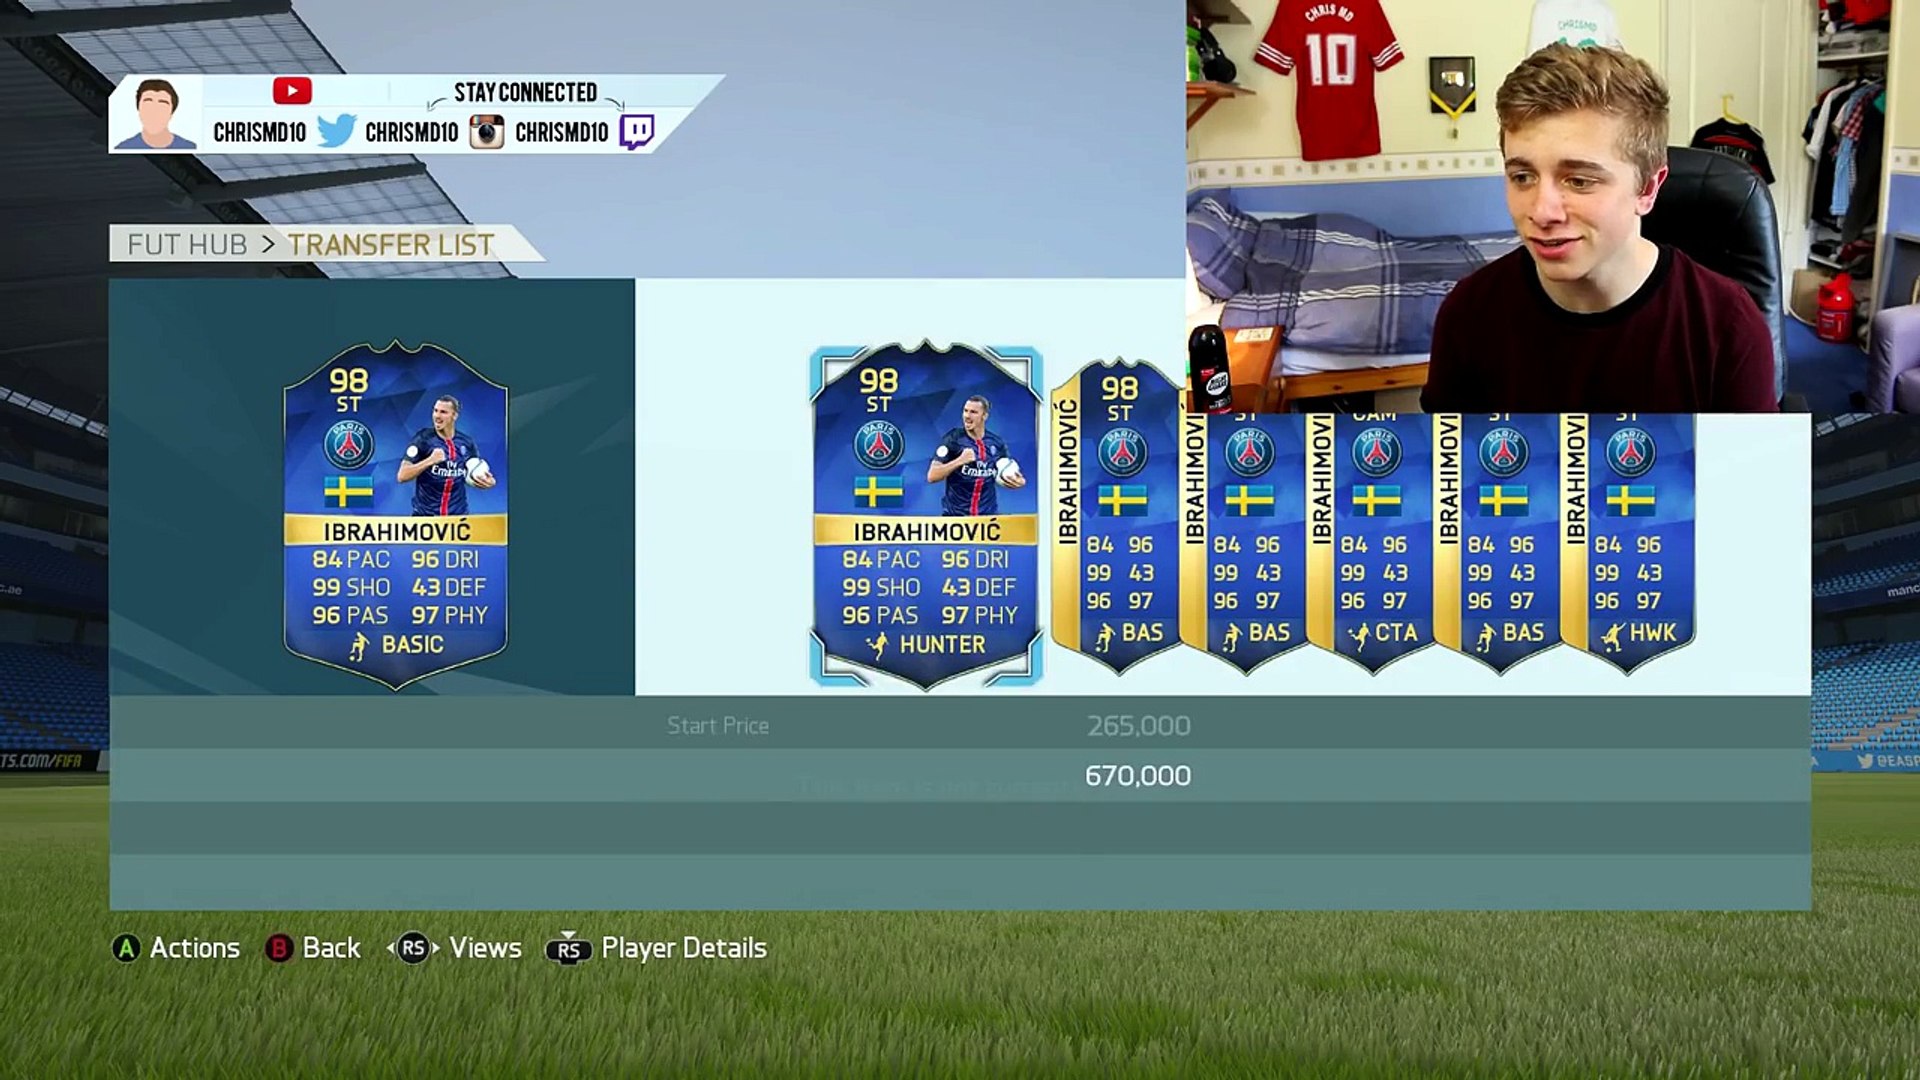 THE PACK OPENING TO END ALL TOTS PACK OPENINGS - ChrisMD - video Dailymotion